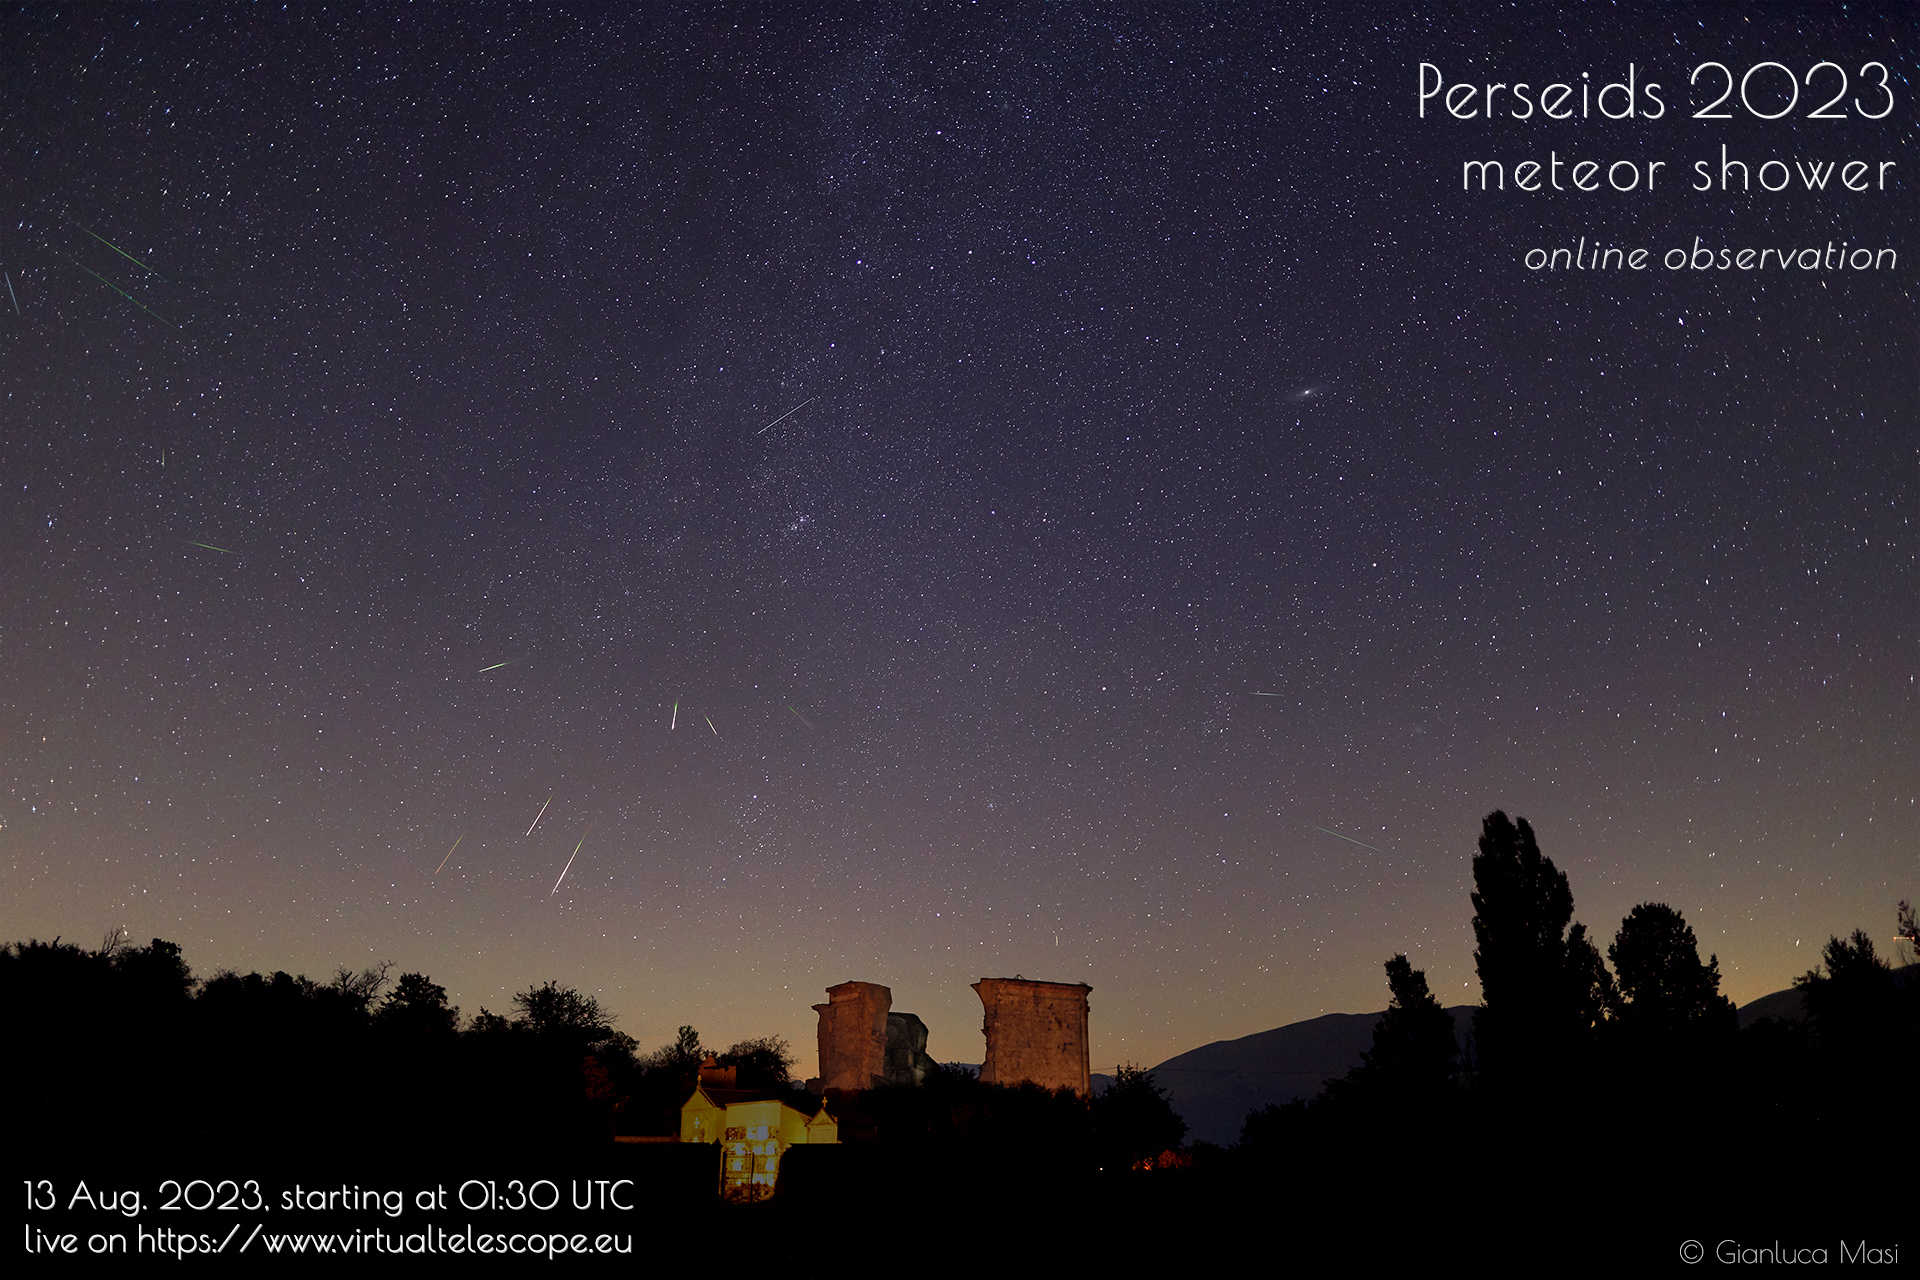 Perseids 2023: poster of the event.